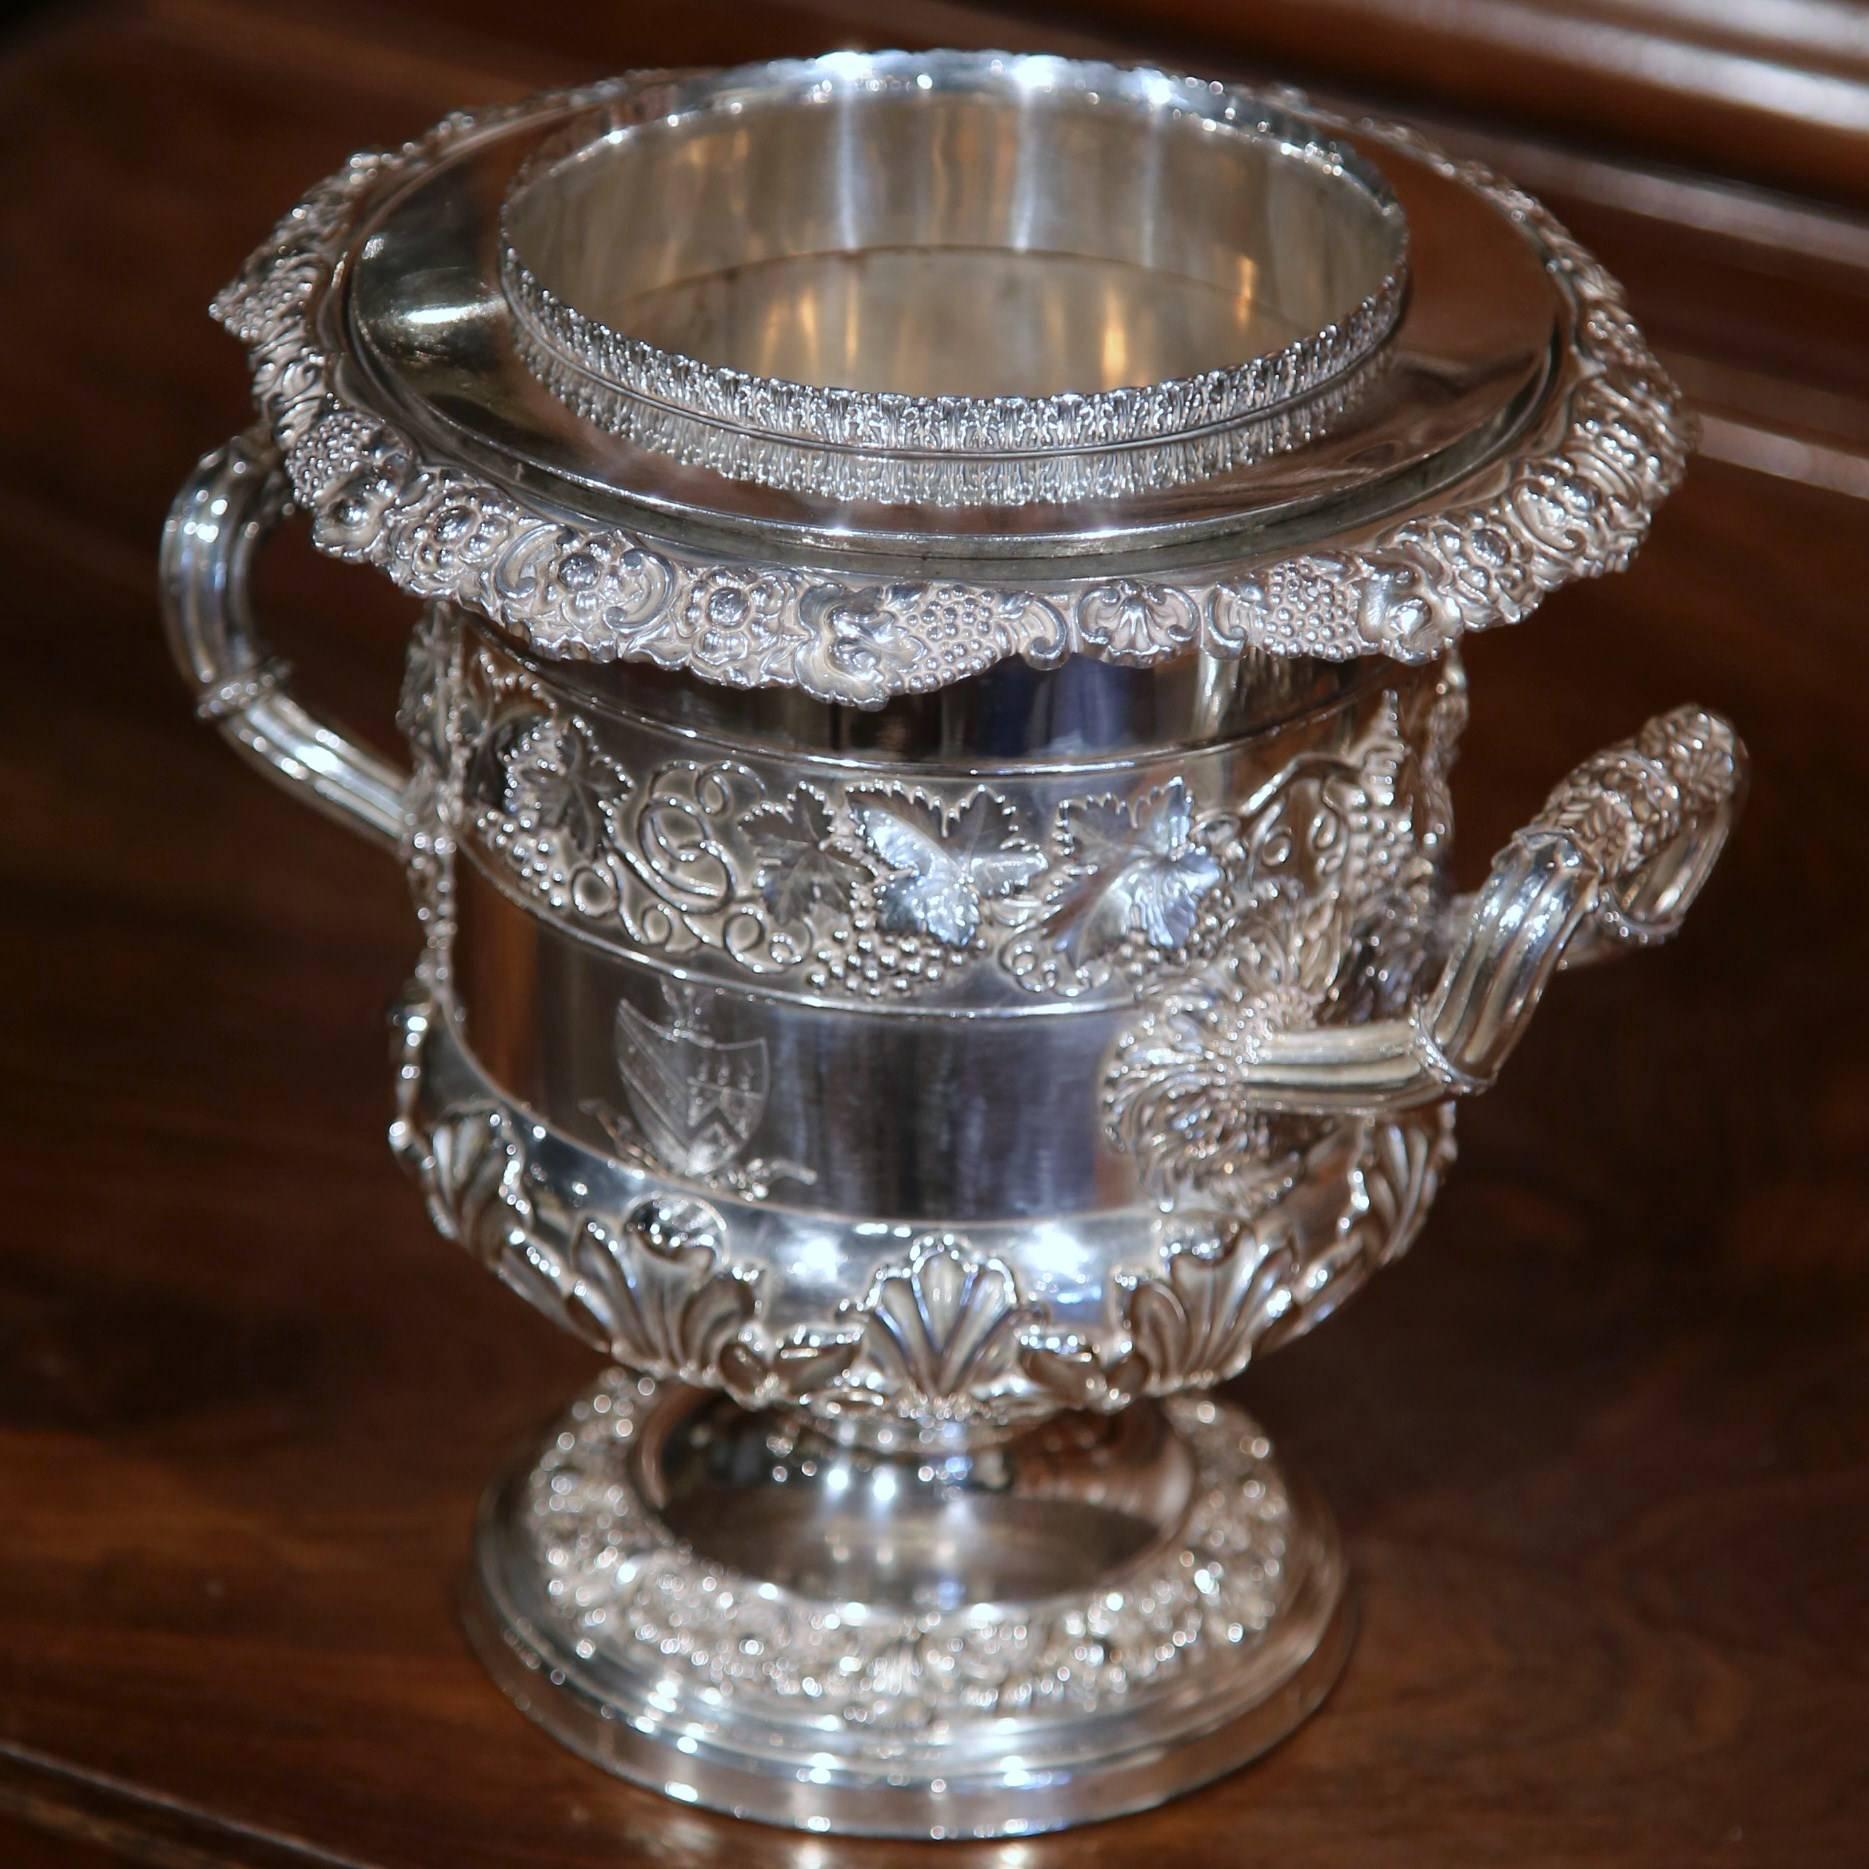 This beautifully carved silver plated champagne cooler was crafted in England, circa 1900. The wine holder is decorated with repousse designs, including grapes, vine leaves and flowers. Around the sides, the bucket is further embellished with two